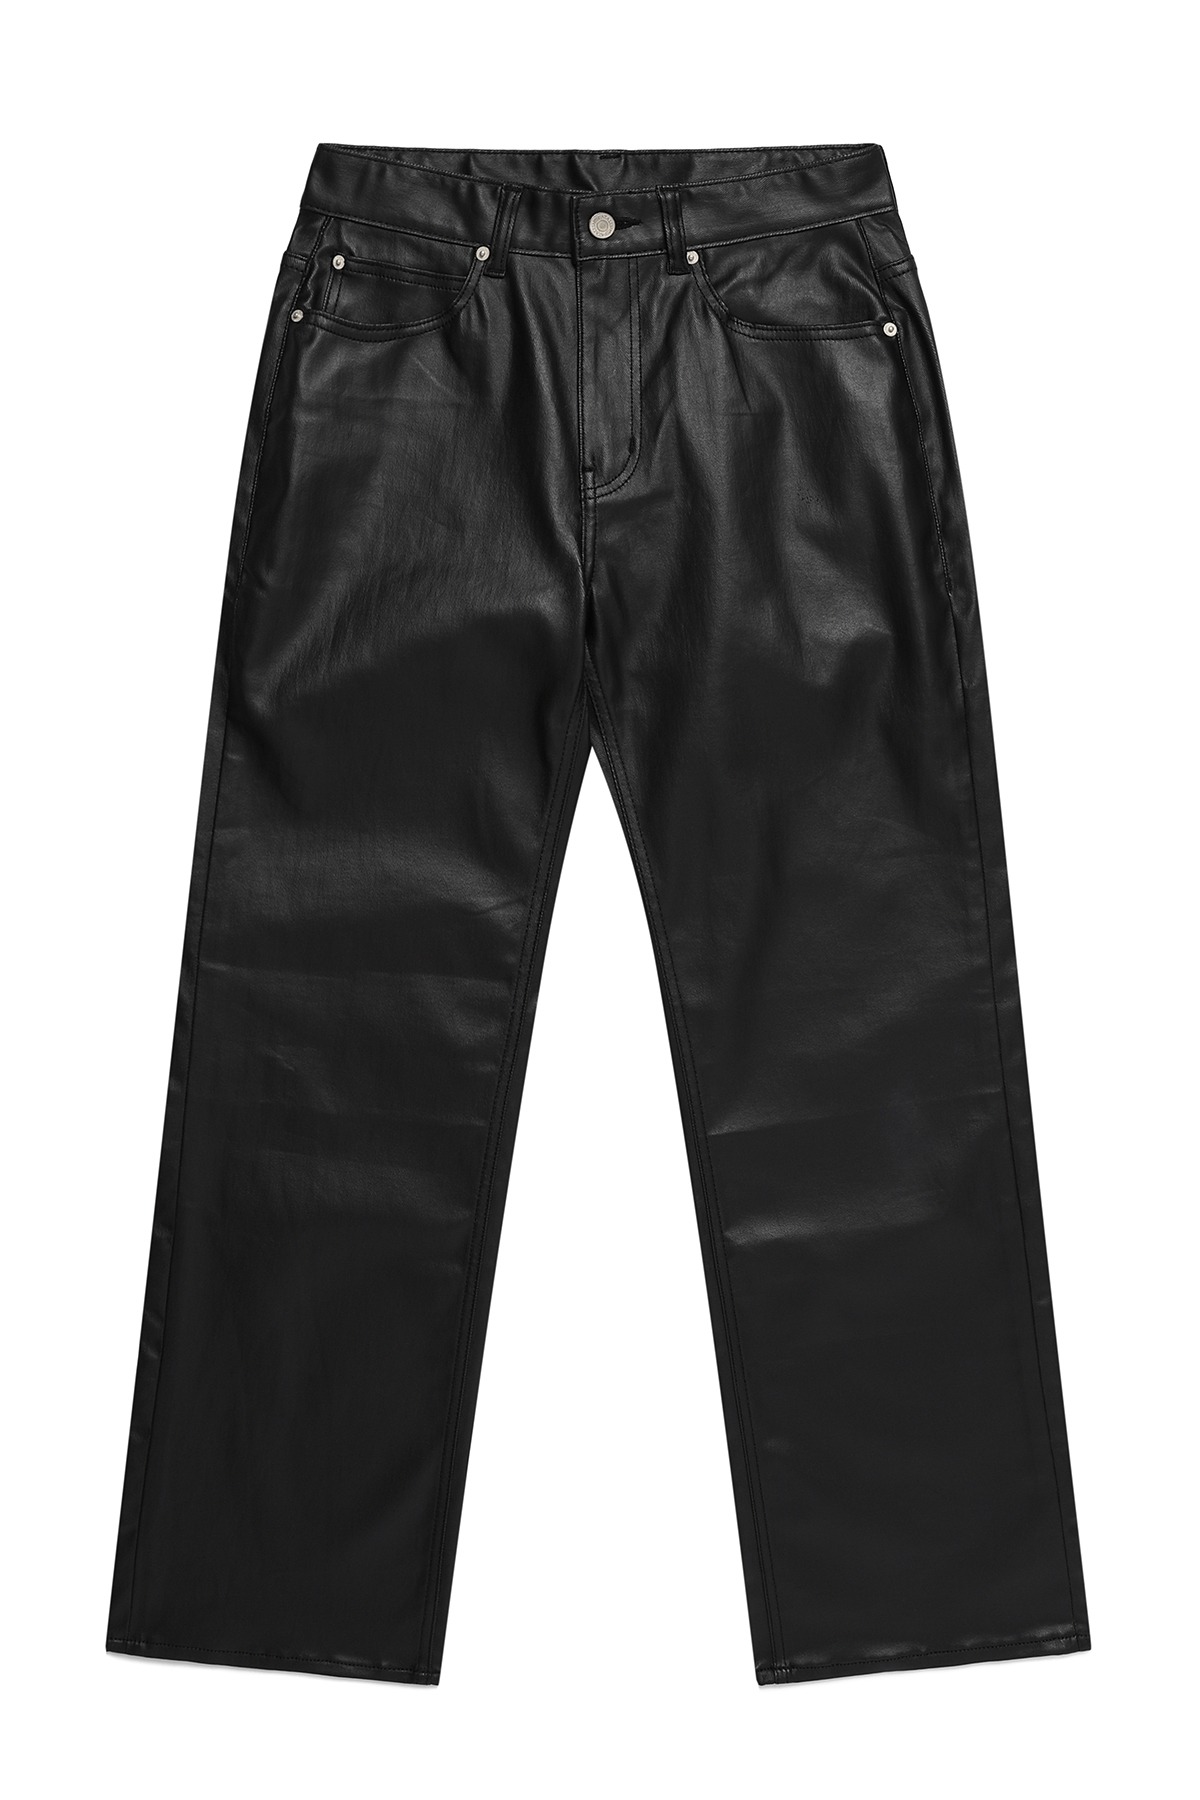 [preorder] #0336 Eco Carbon coated semi wide jeans